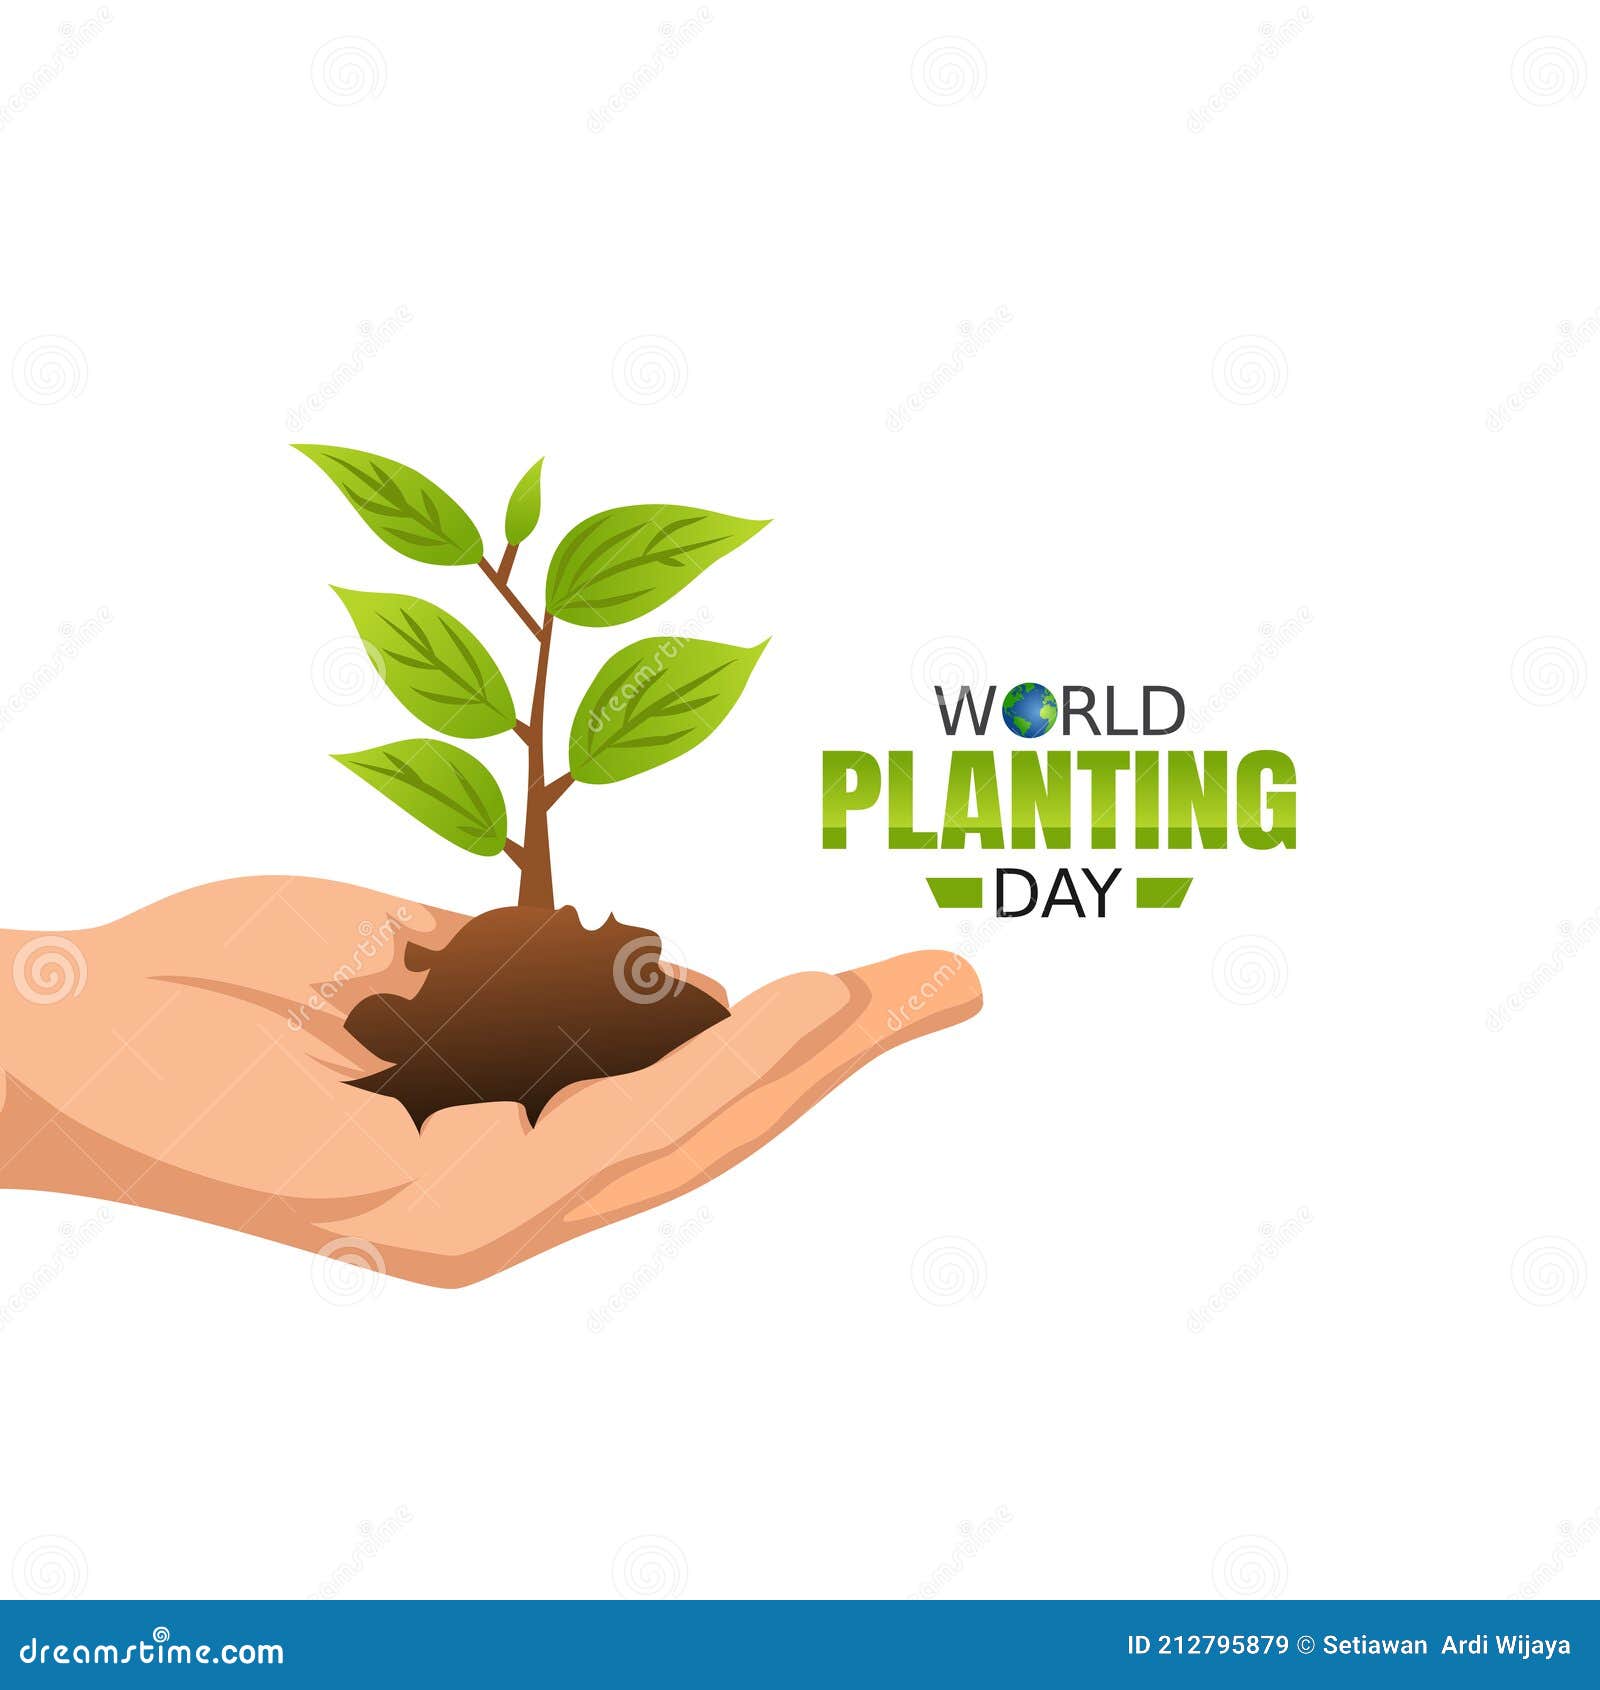 Vector Graphic of World Planting Day Good for World Planting Day